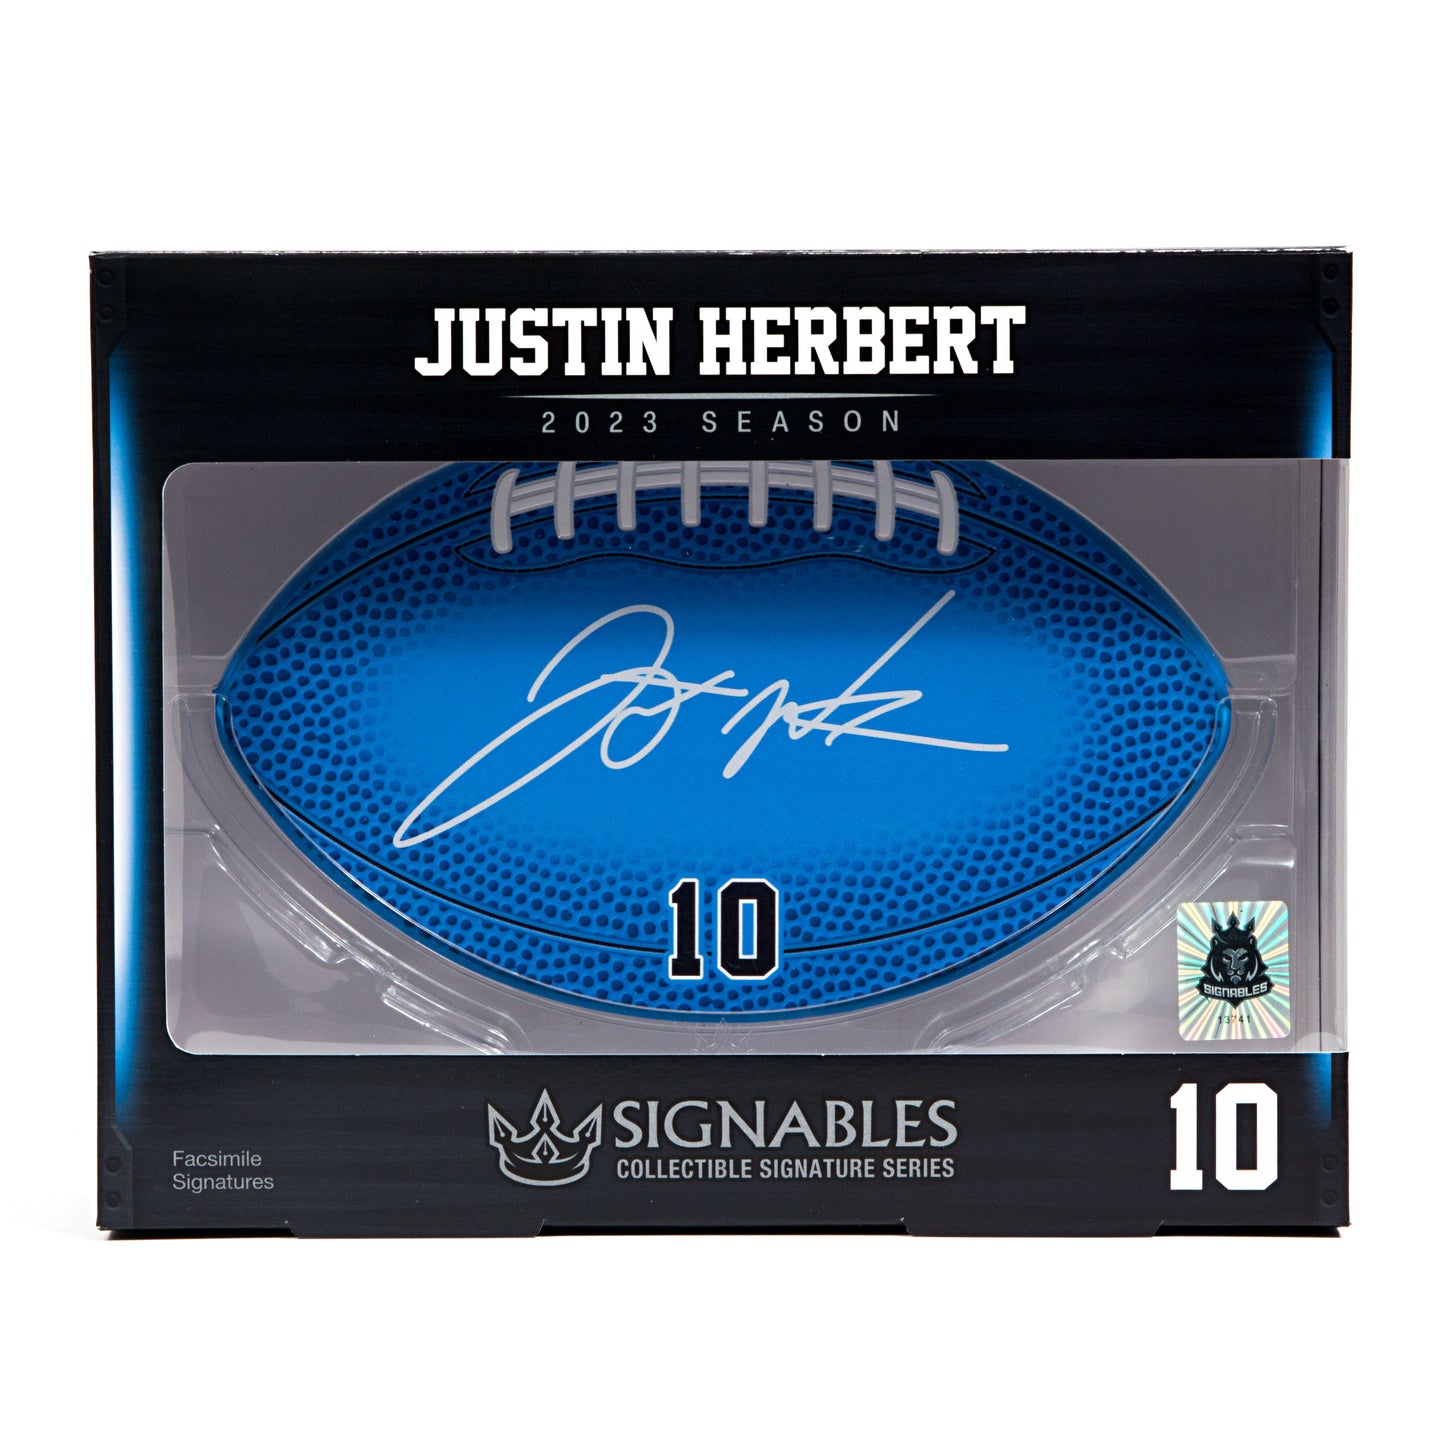 Justin Herbert NFLPA 2023 Sports Collectible Digitally Signed